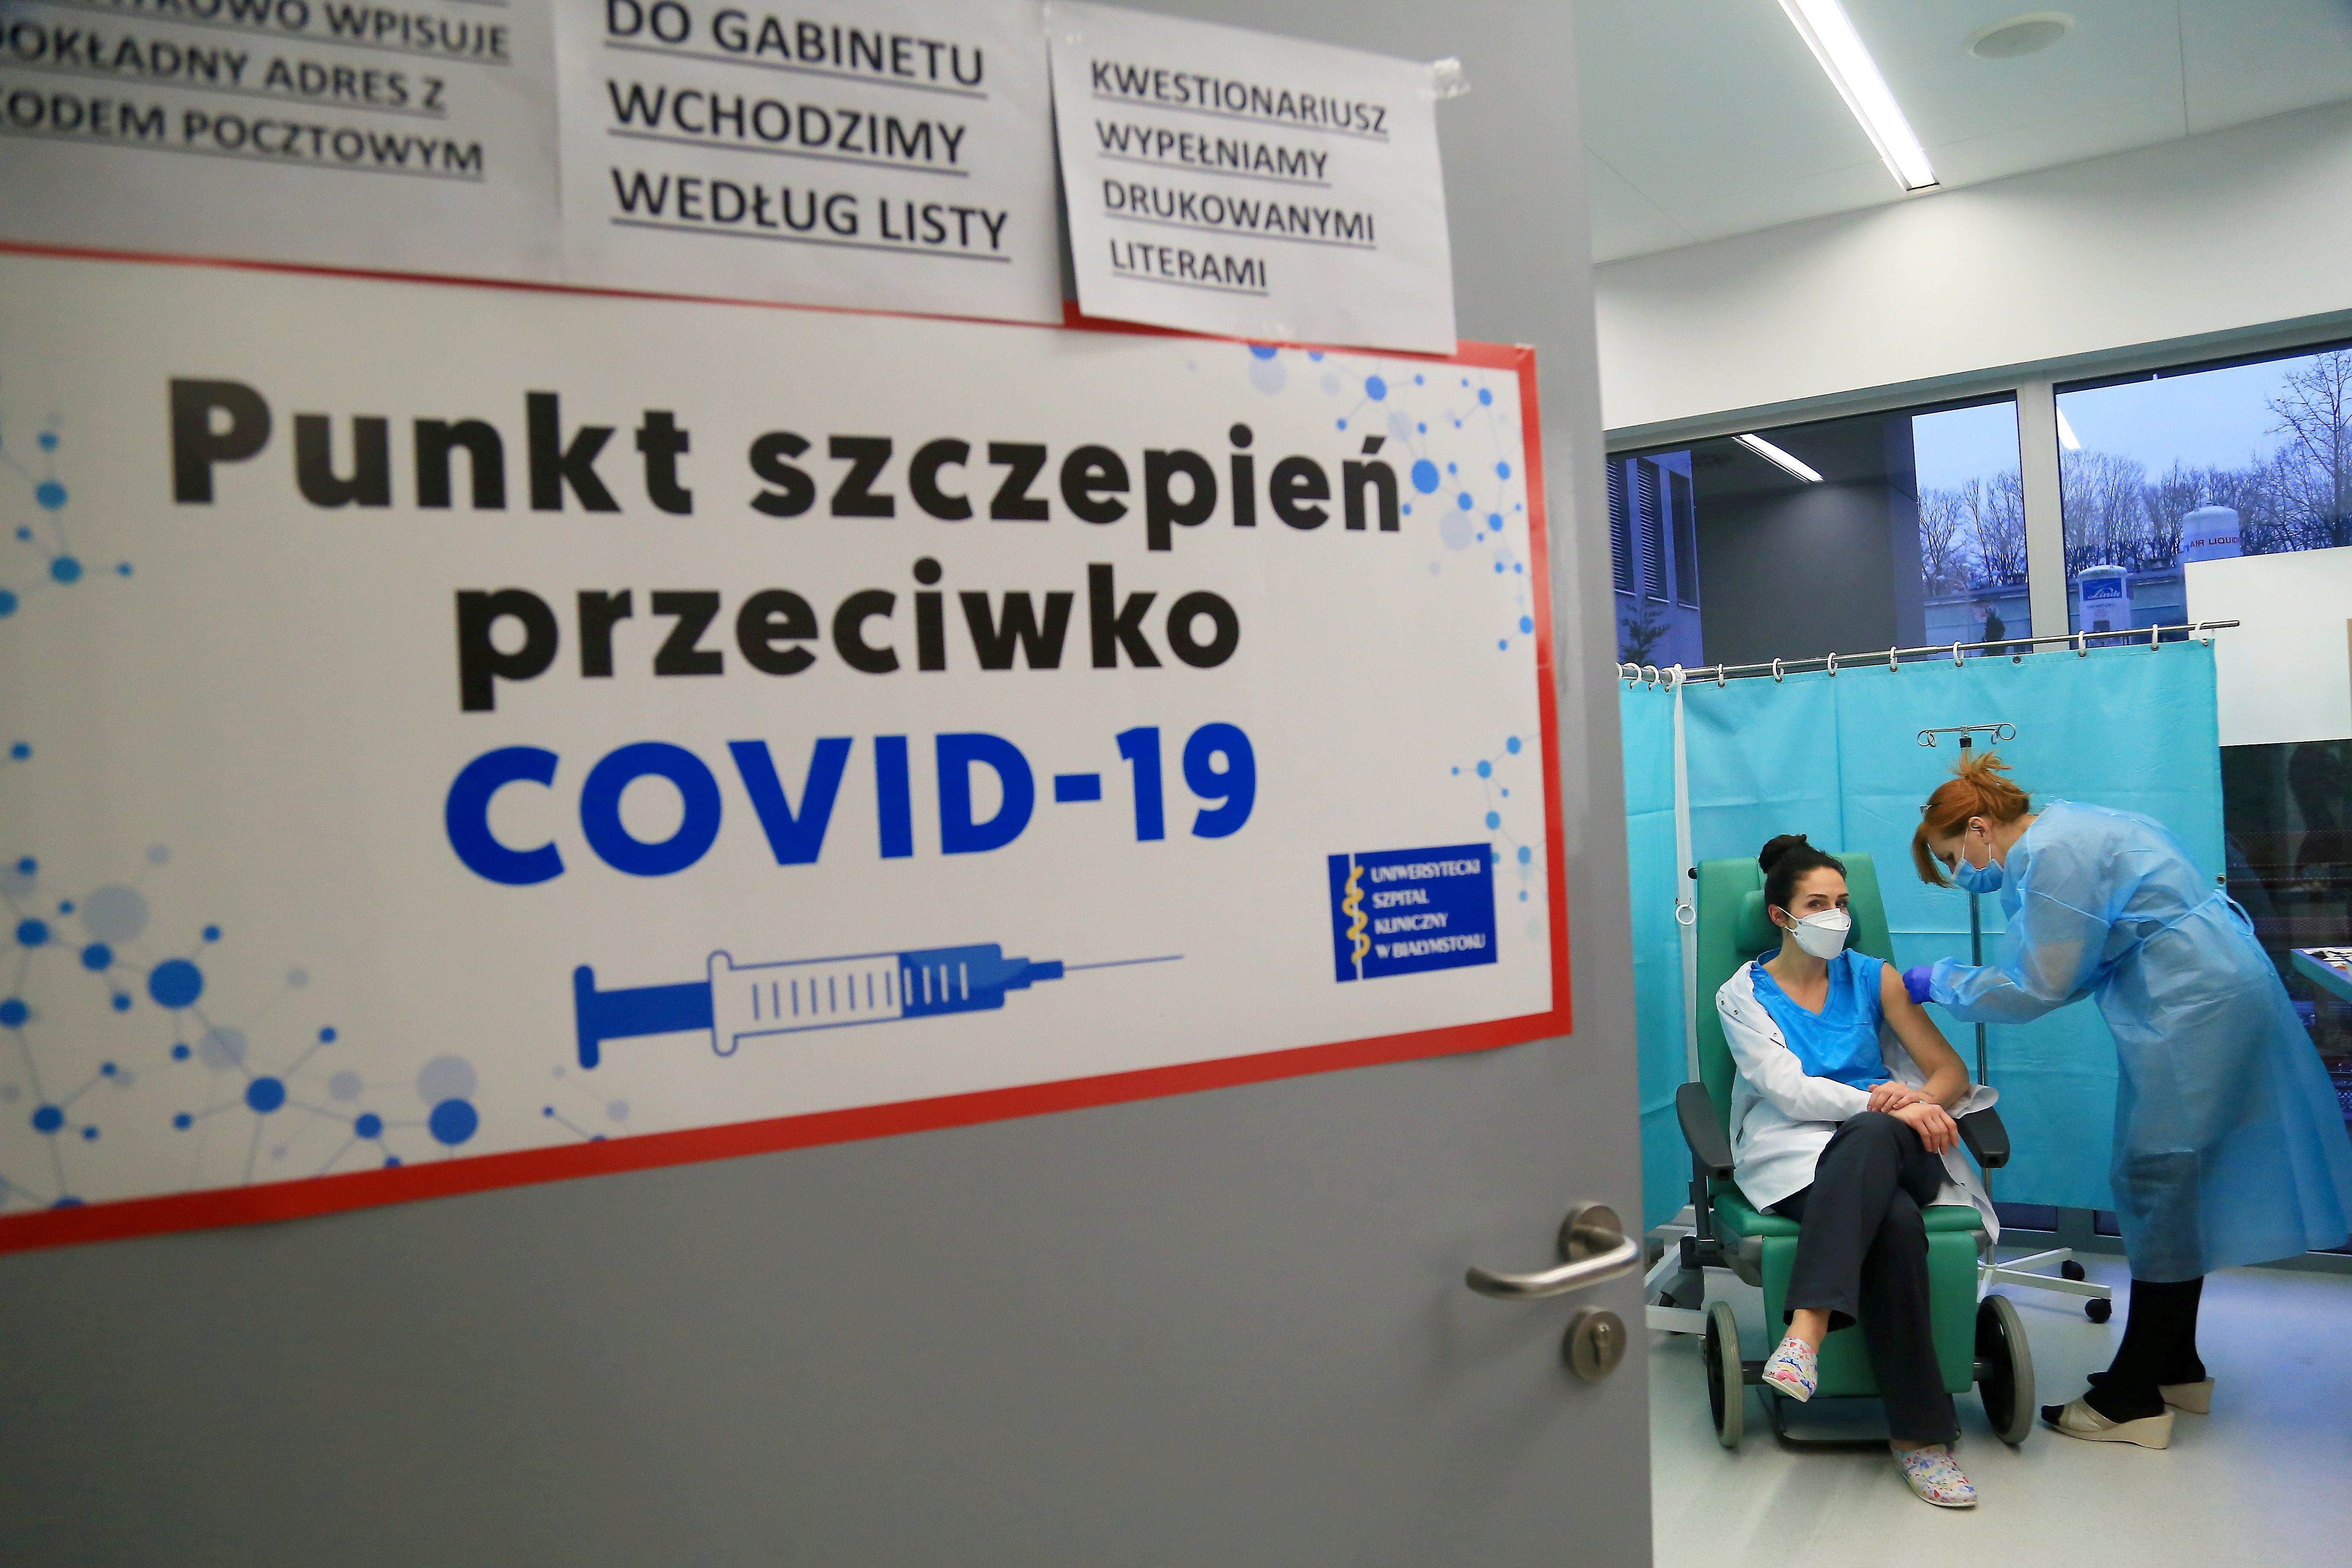 Poles scramble to sign up for COVID-19 jabs after surprise policy shift